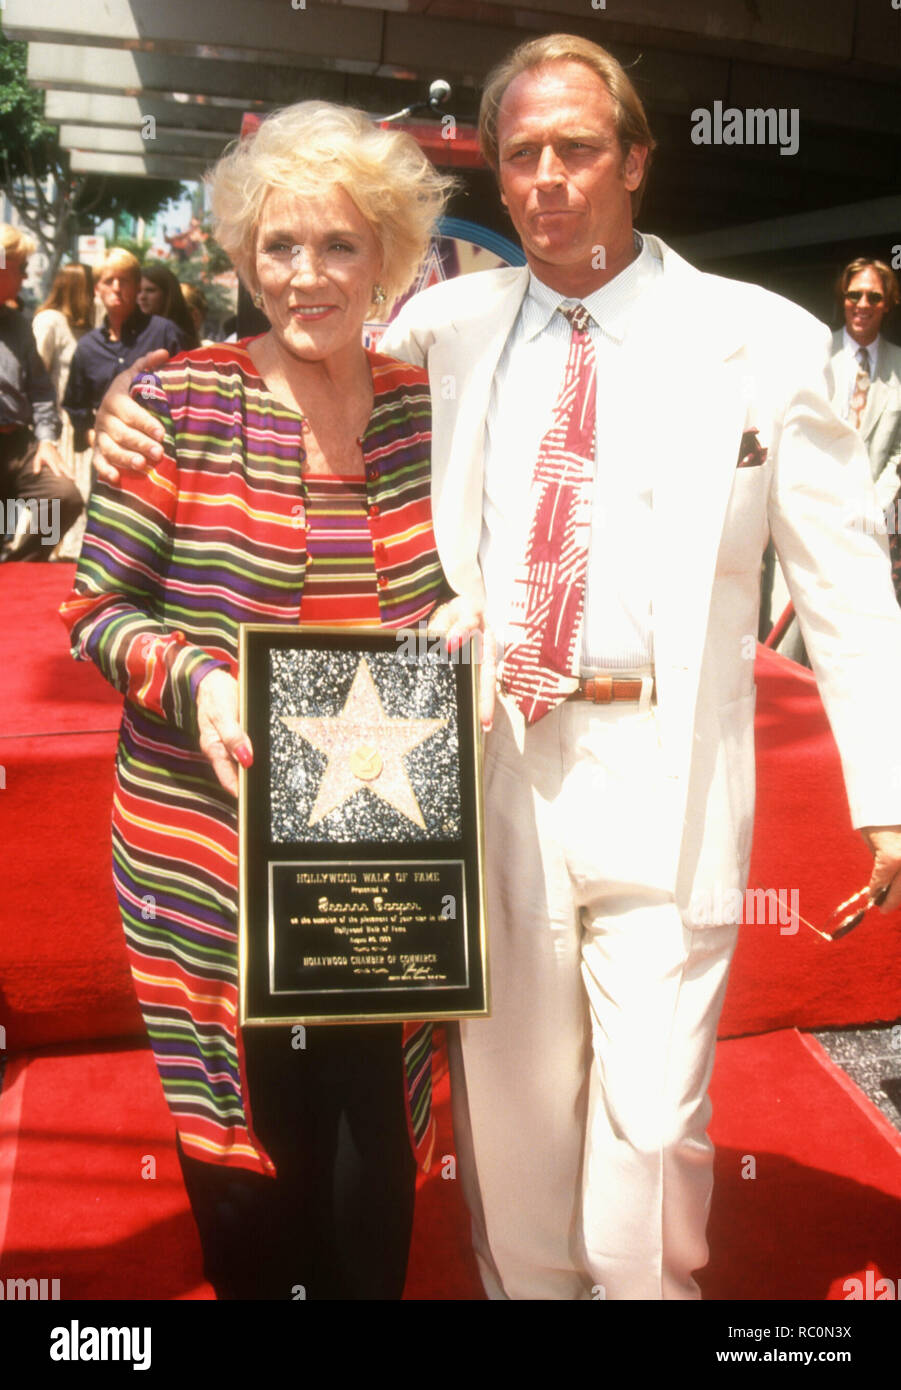 Pictures jeanne cooper Obituary Photos